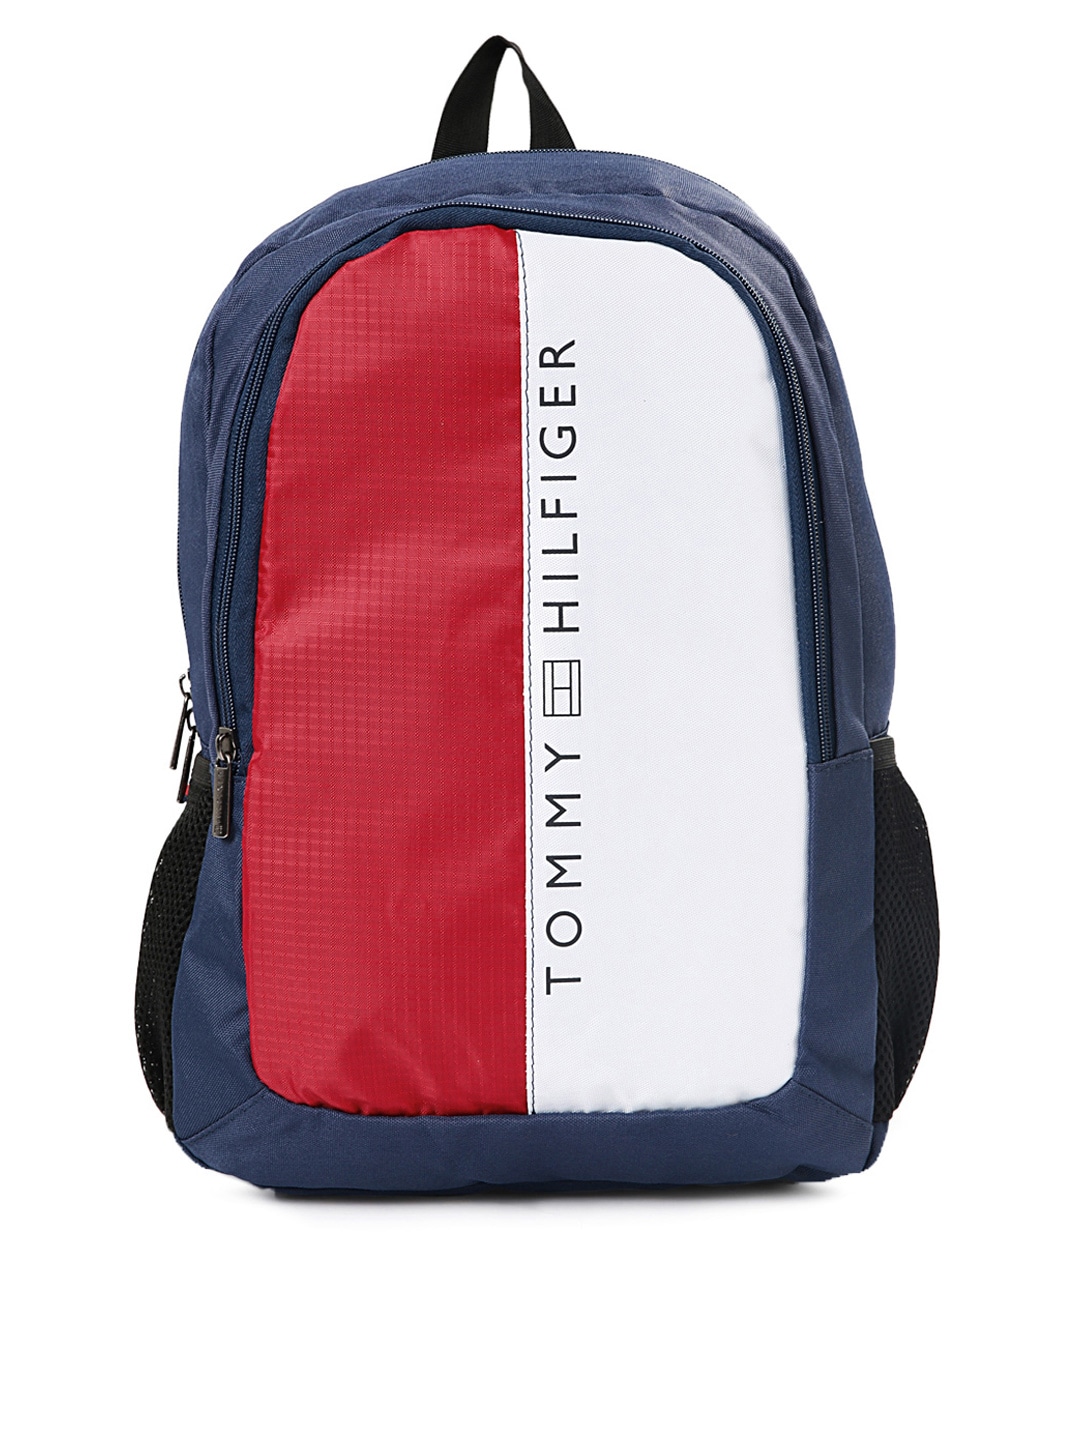 puma bags for college